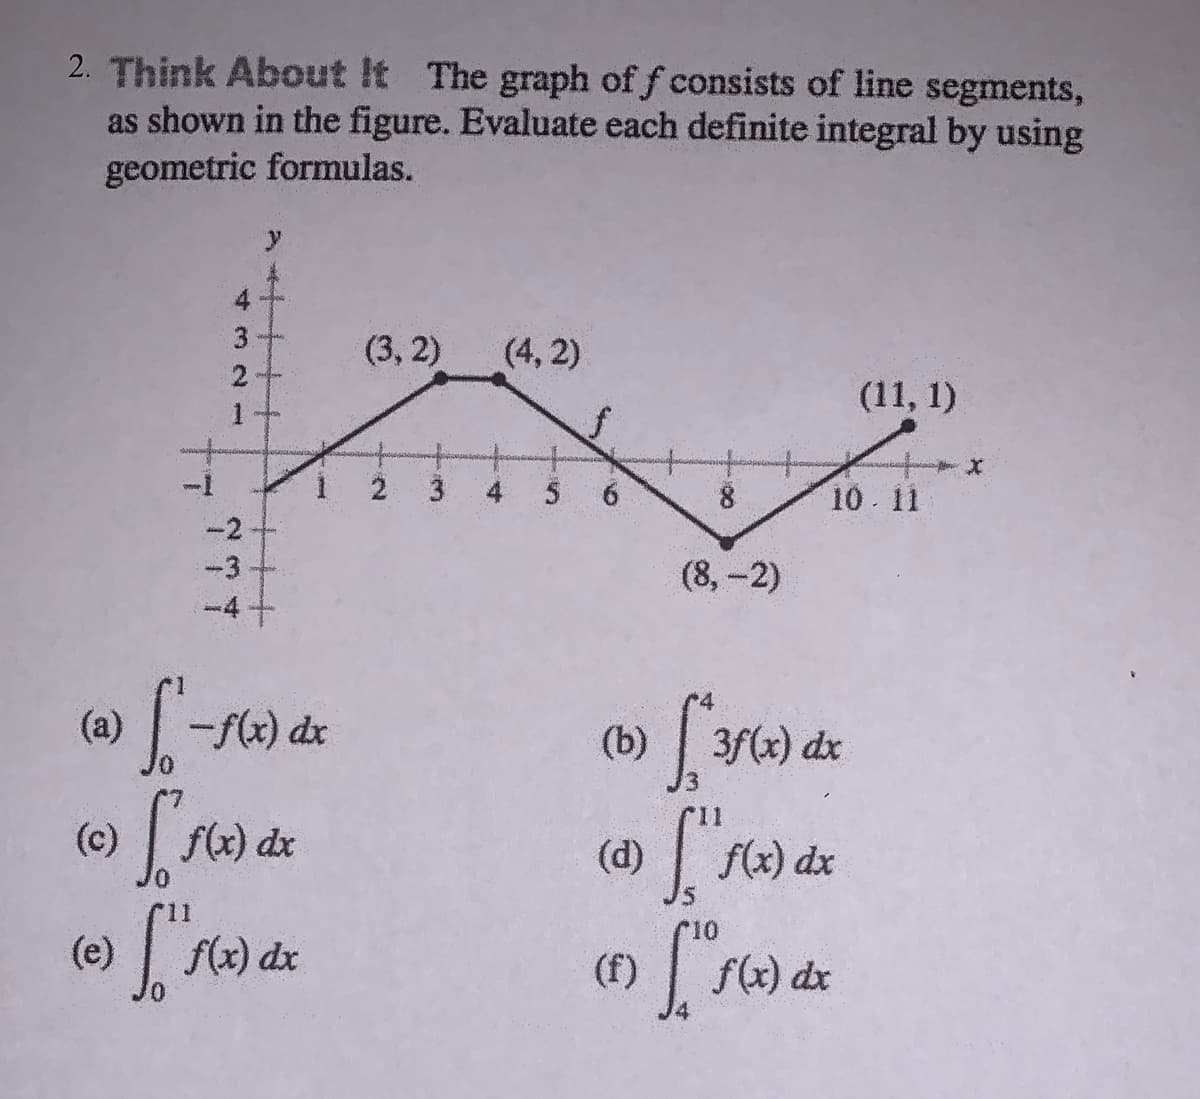 2. Think About It The graph of f consists of line segments,
as shown in the figure. Evaluate each definite integral by using
geometric formulas.
(3, 2)
(4, 2)
(11, 1)
3
10 11
-2
-3
(8, -2)
-4+
(a)
-f(x) dx
(b)
3f(x) dx
(c)
f(x) dx
(d)
f(x) dx
10
(e)
f(x) dx
(f)
f(x) dx
4.
+++
432-
